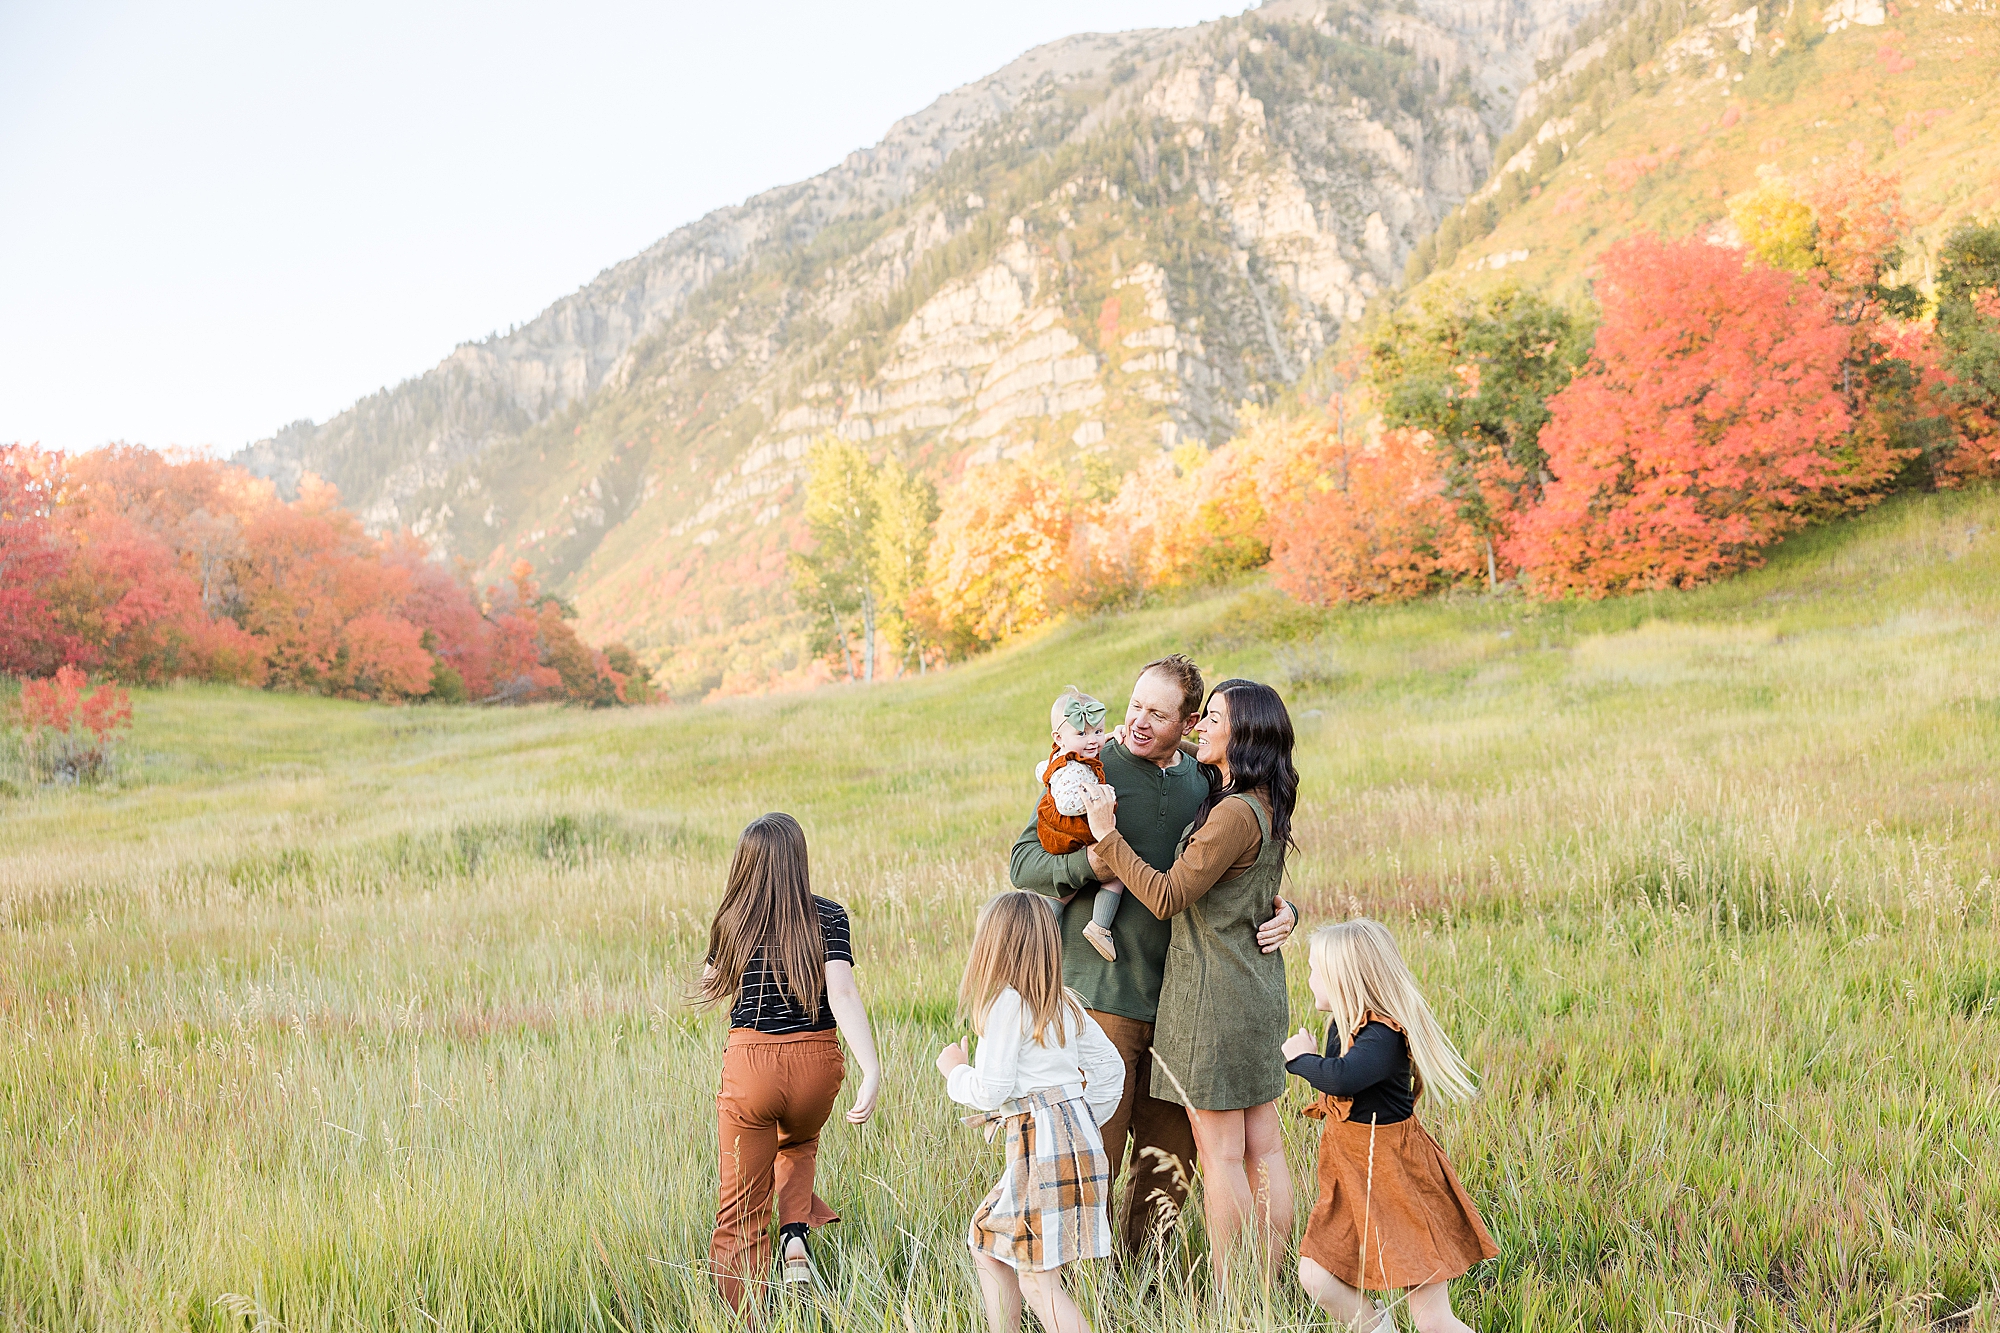 Provo Canyon makes for the most incredible fall backdrop for your family photos.